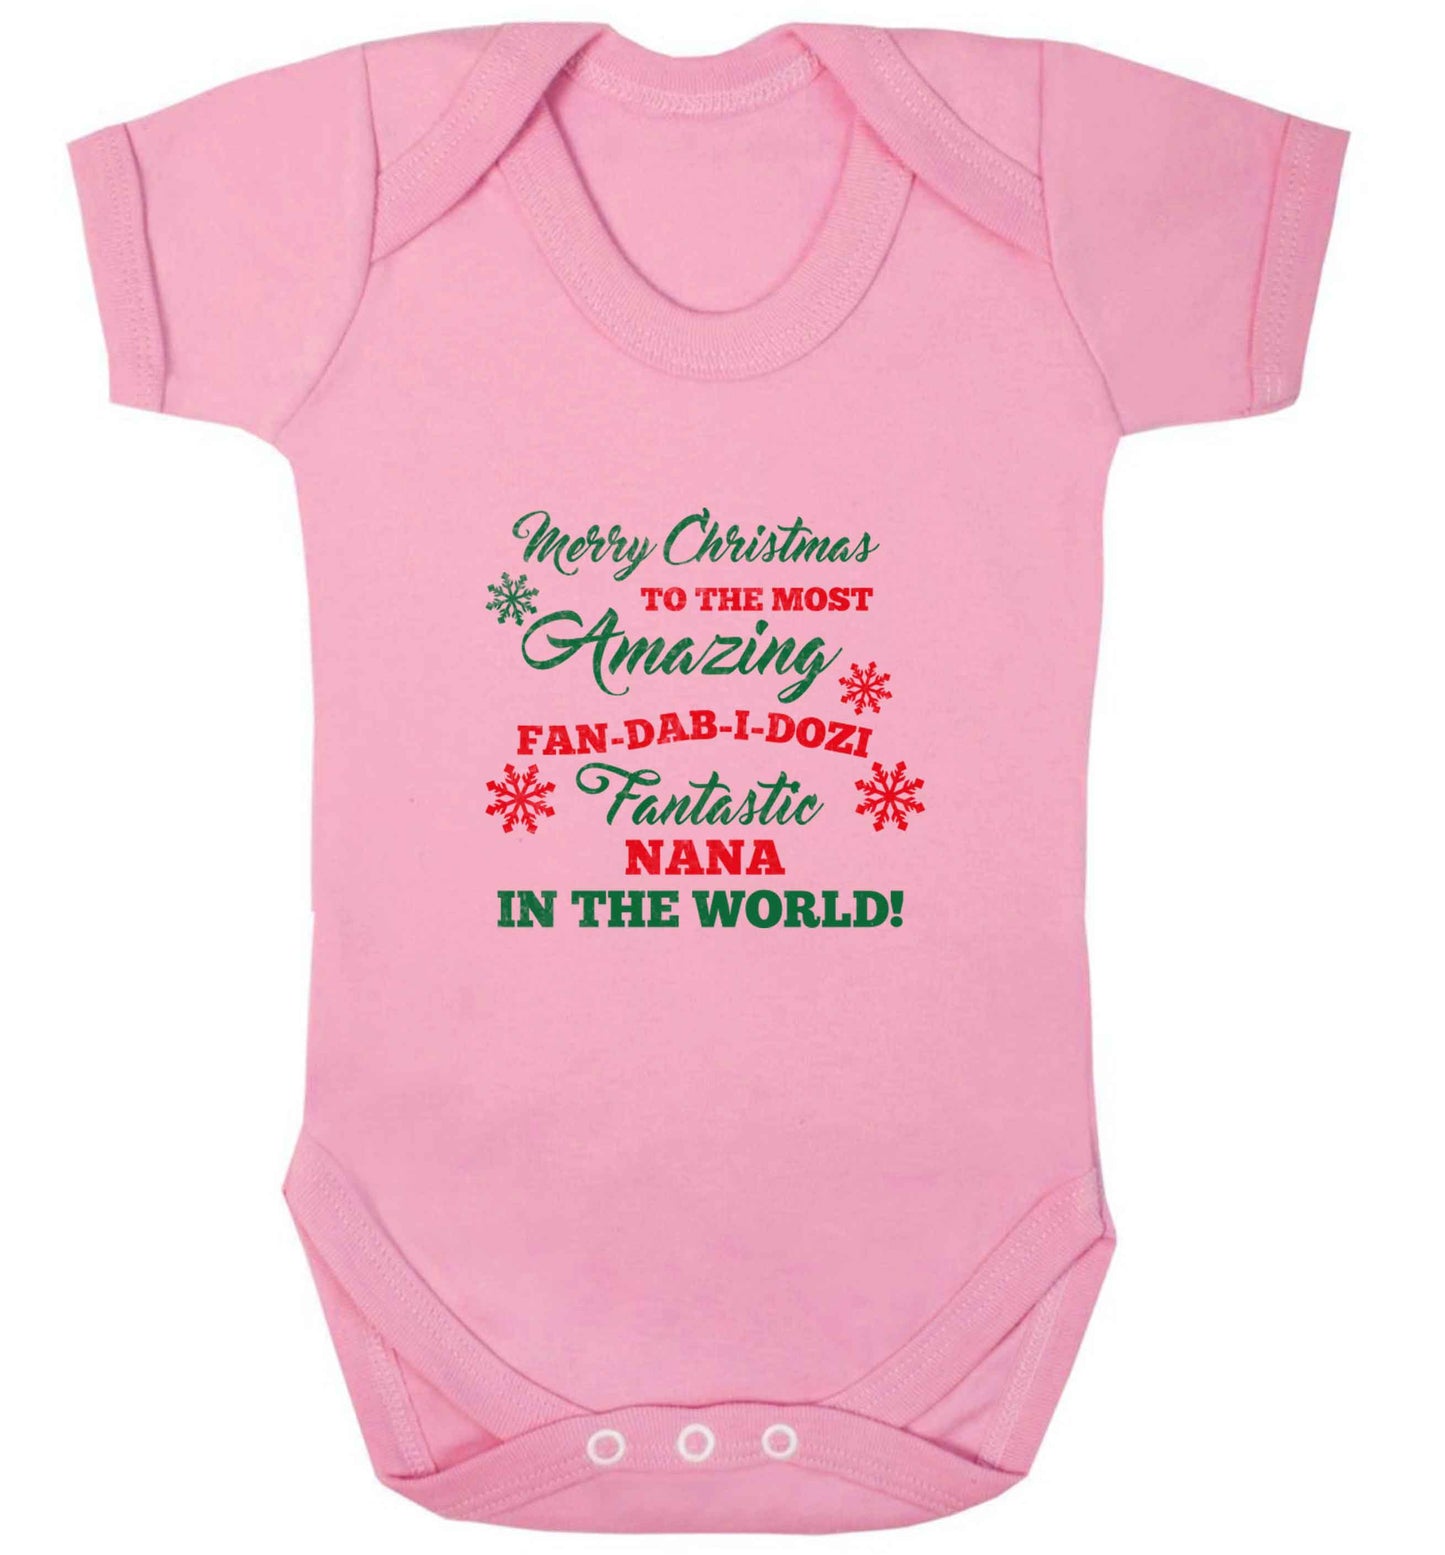 Merry Christmas to the most amazing fan-dab-i-dozi fantasic Nana in the world baby vest pale pink 18-24 months